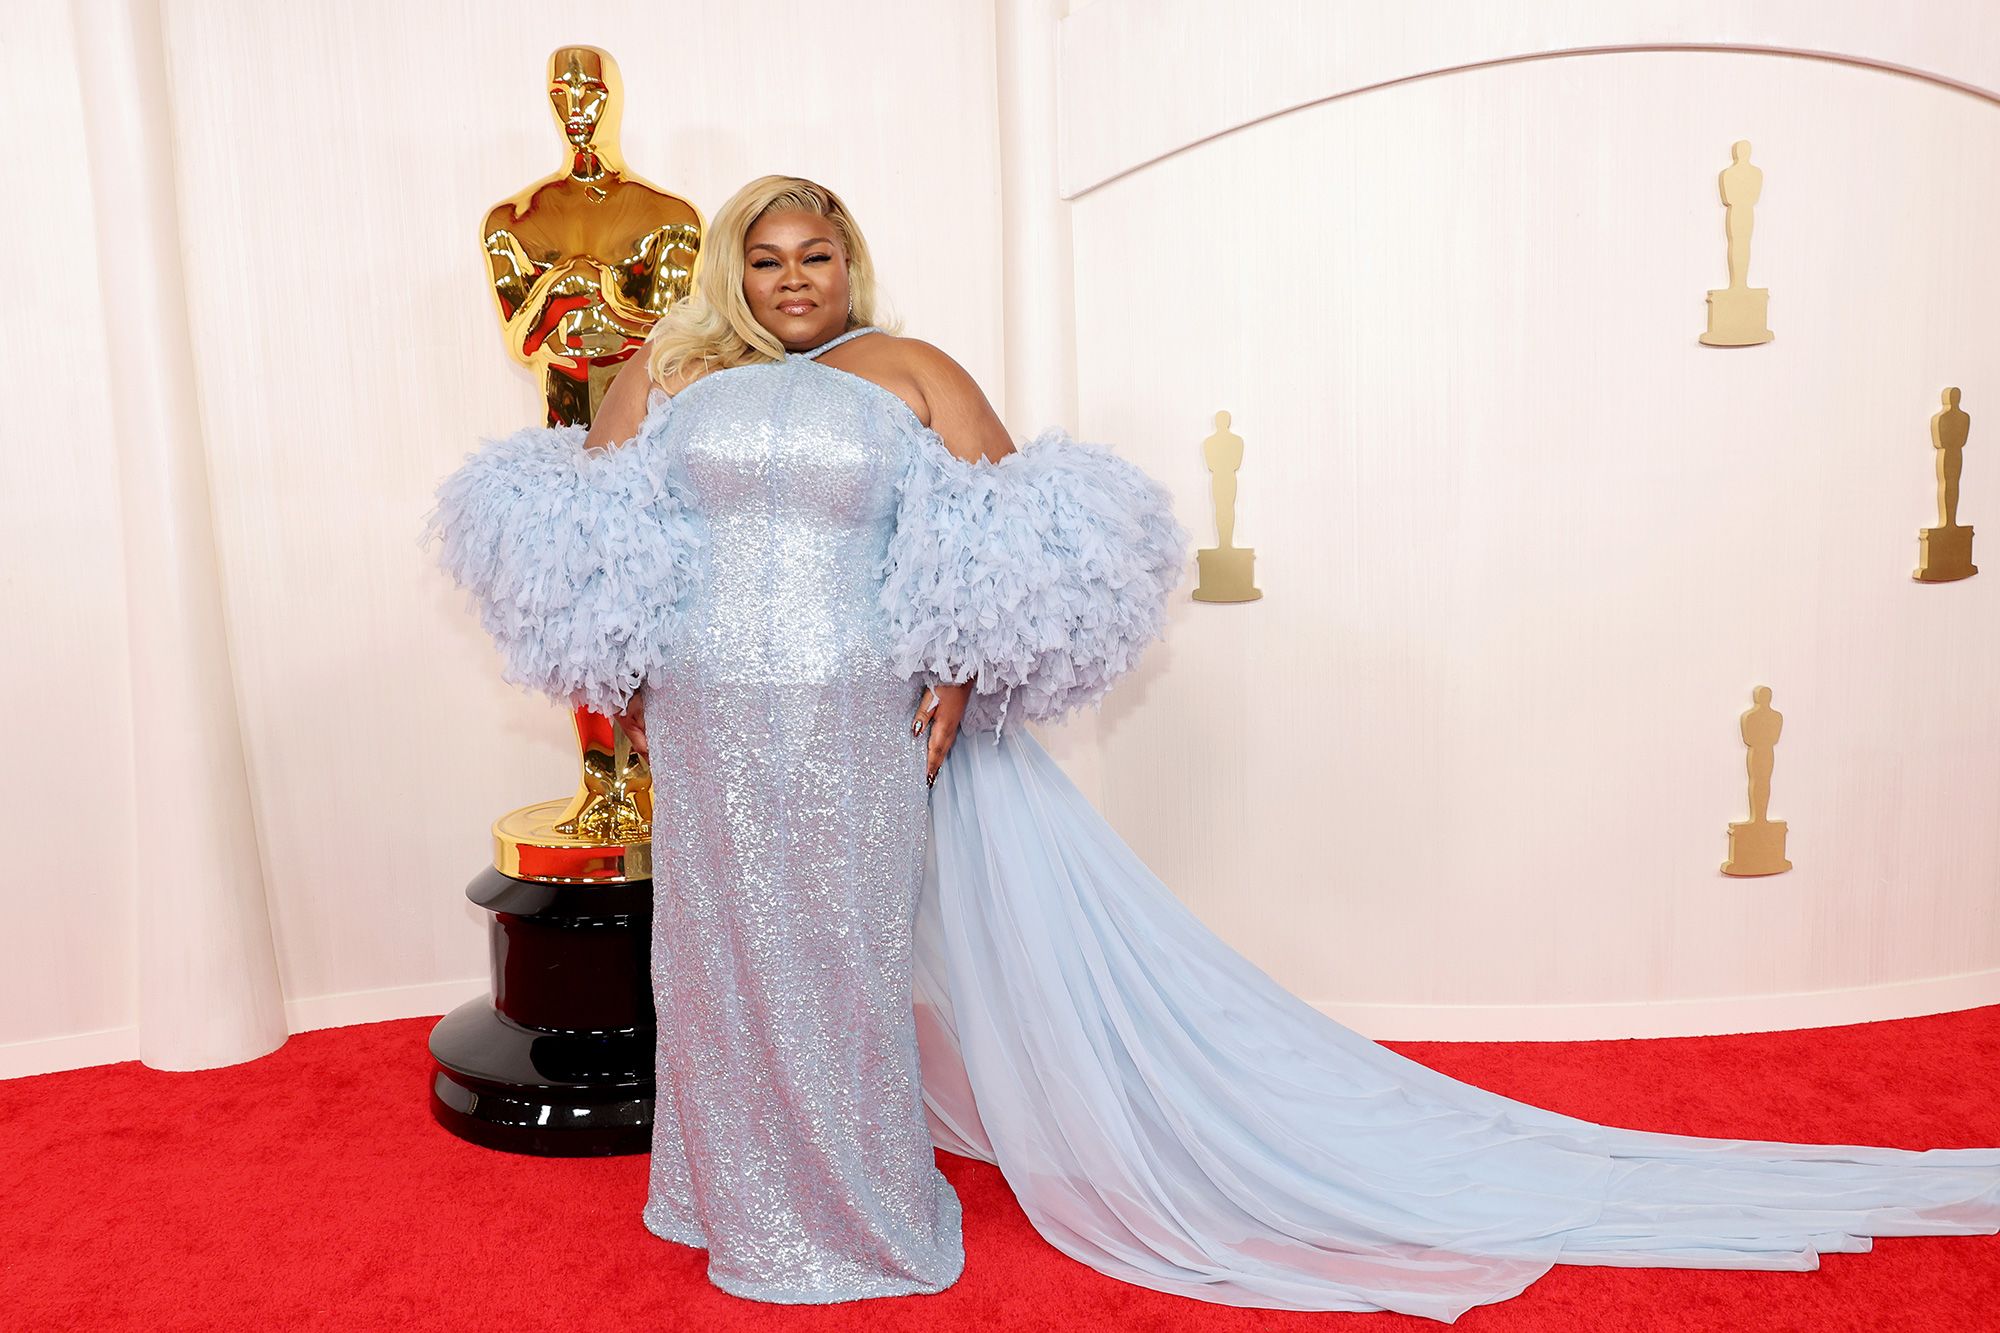 Da'Vine Joy Randolph, who went on to win the Oscar for Best Supporting Actress, wore a custom Louis Vuitton gown with hand-embroidered tulle and oversized fringe sleeves.